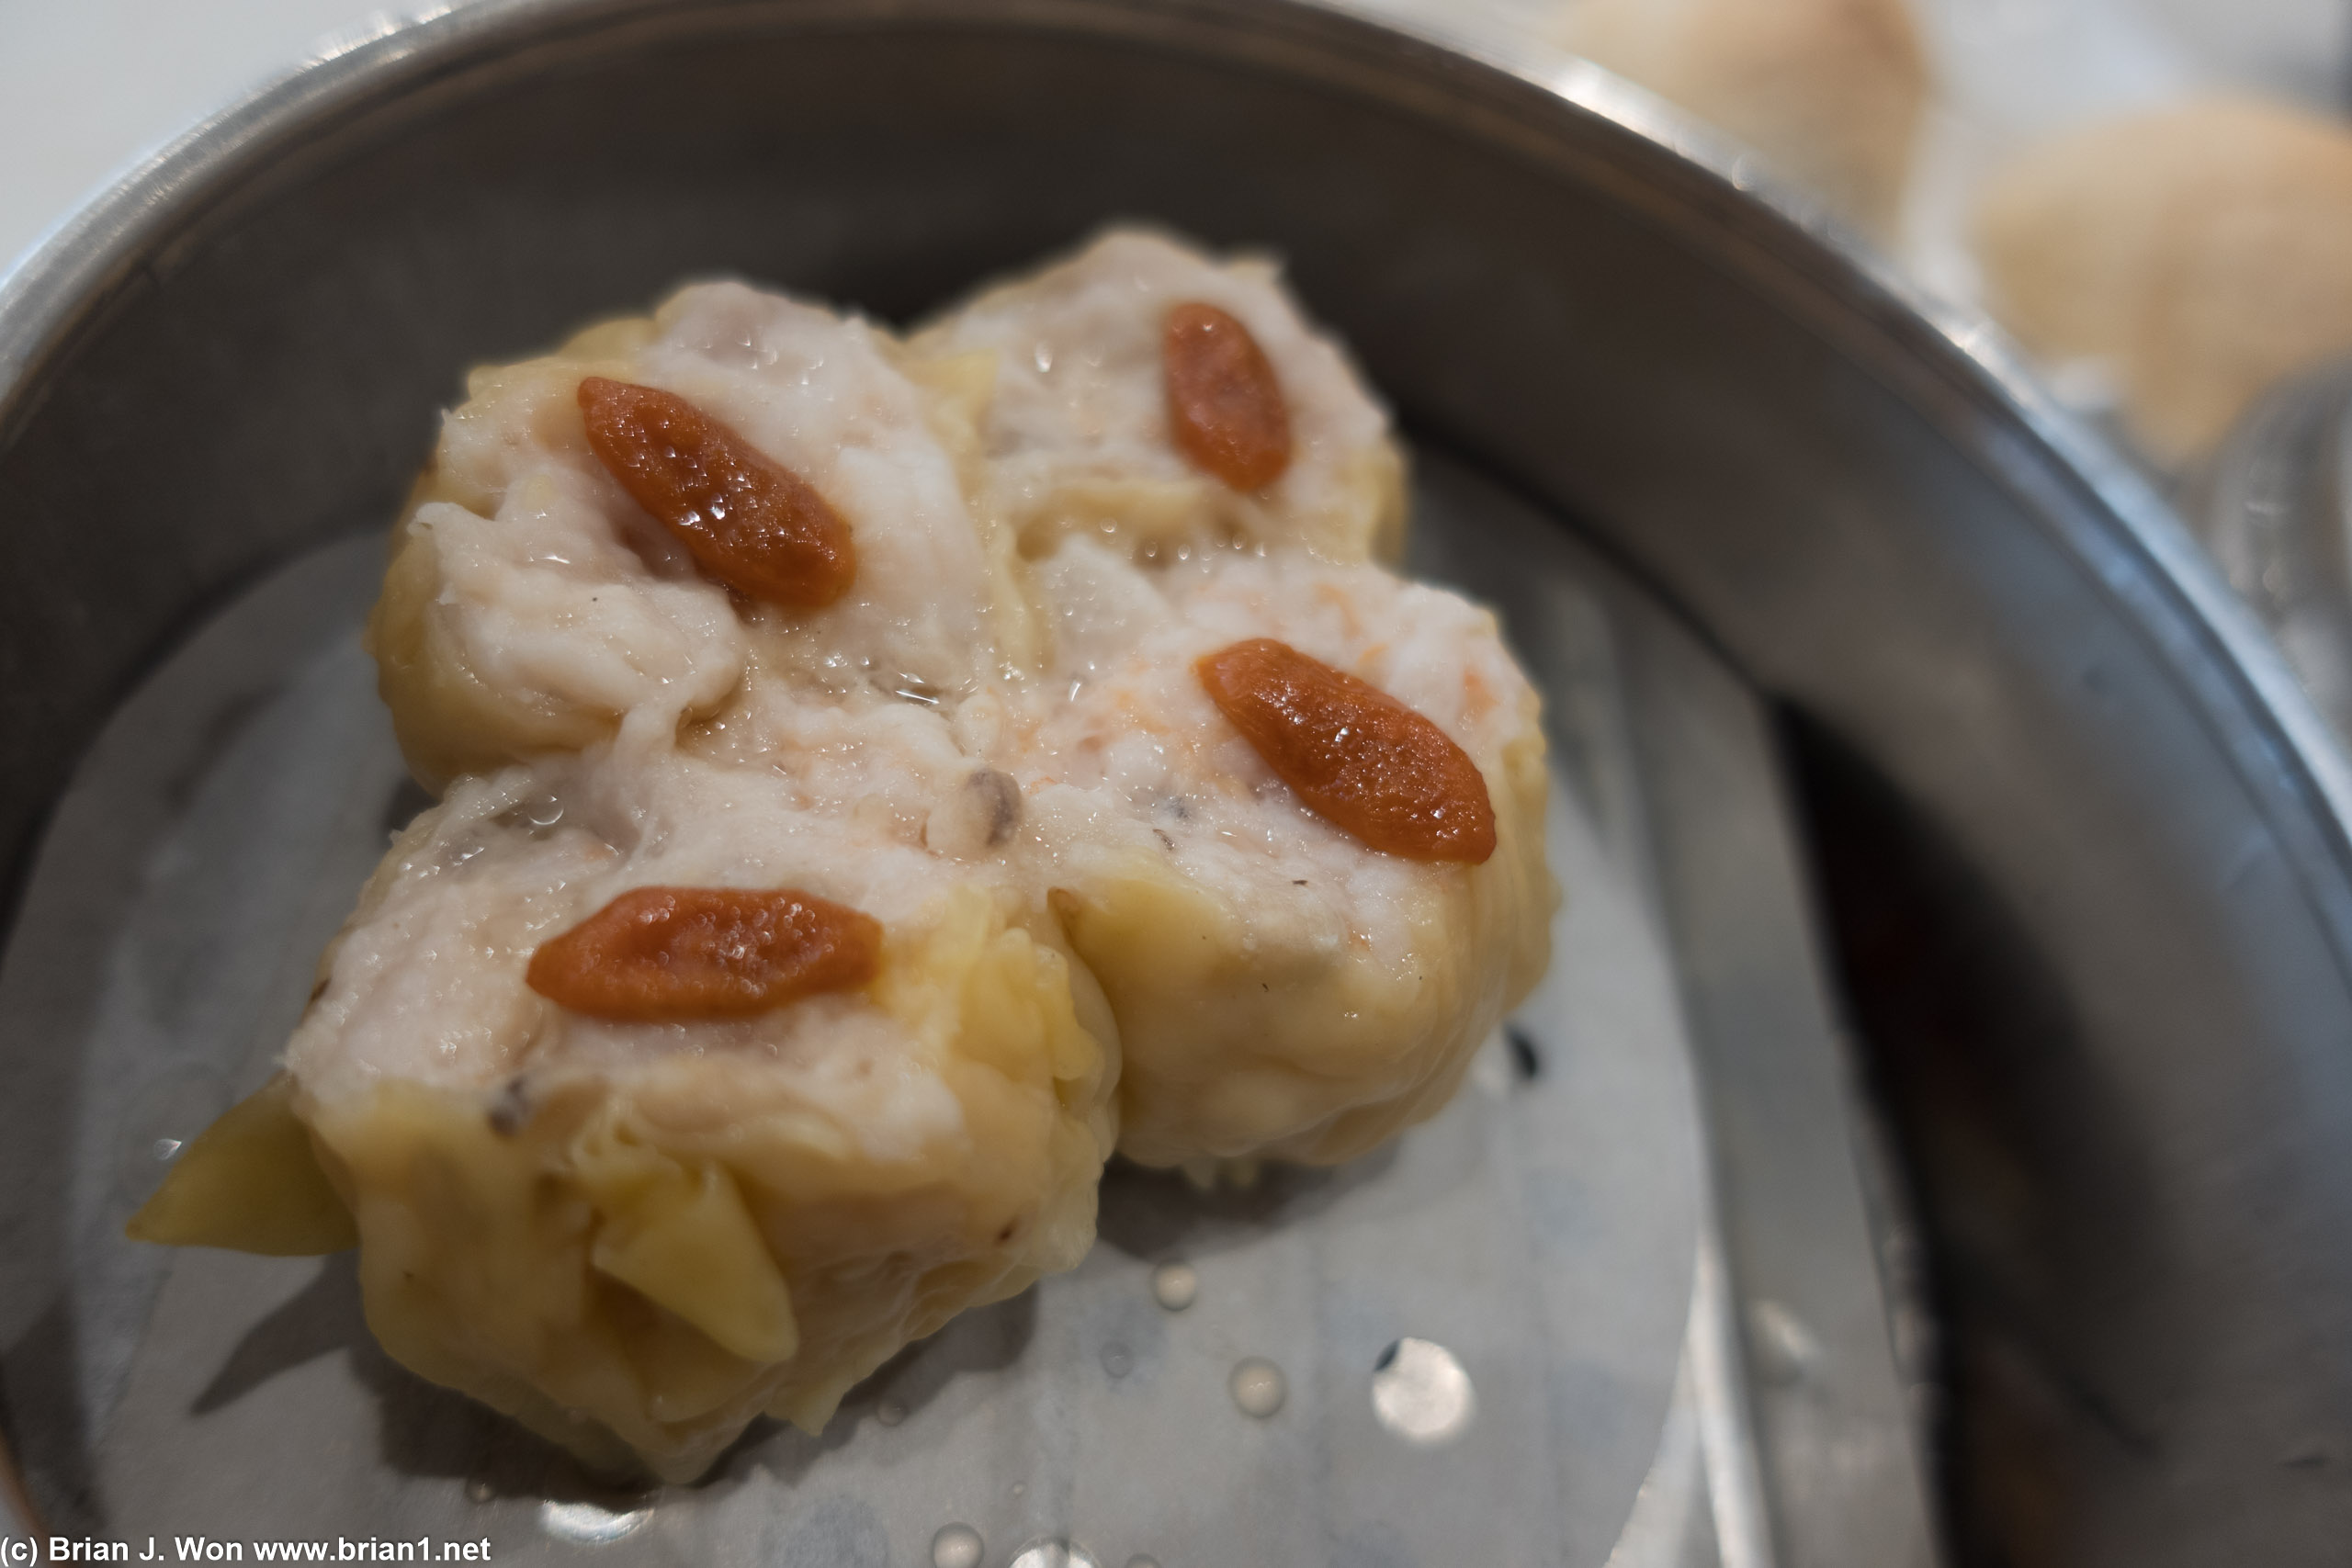 Shu mai looked like they were fresh from the freezer.